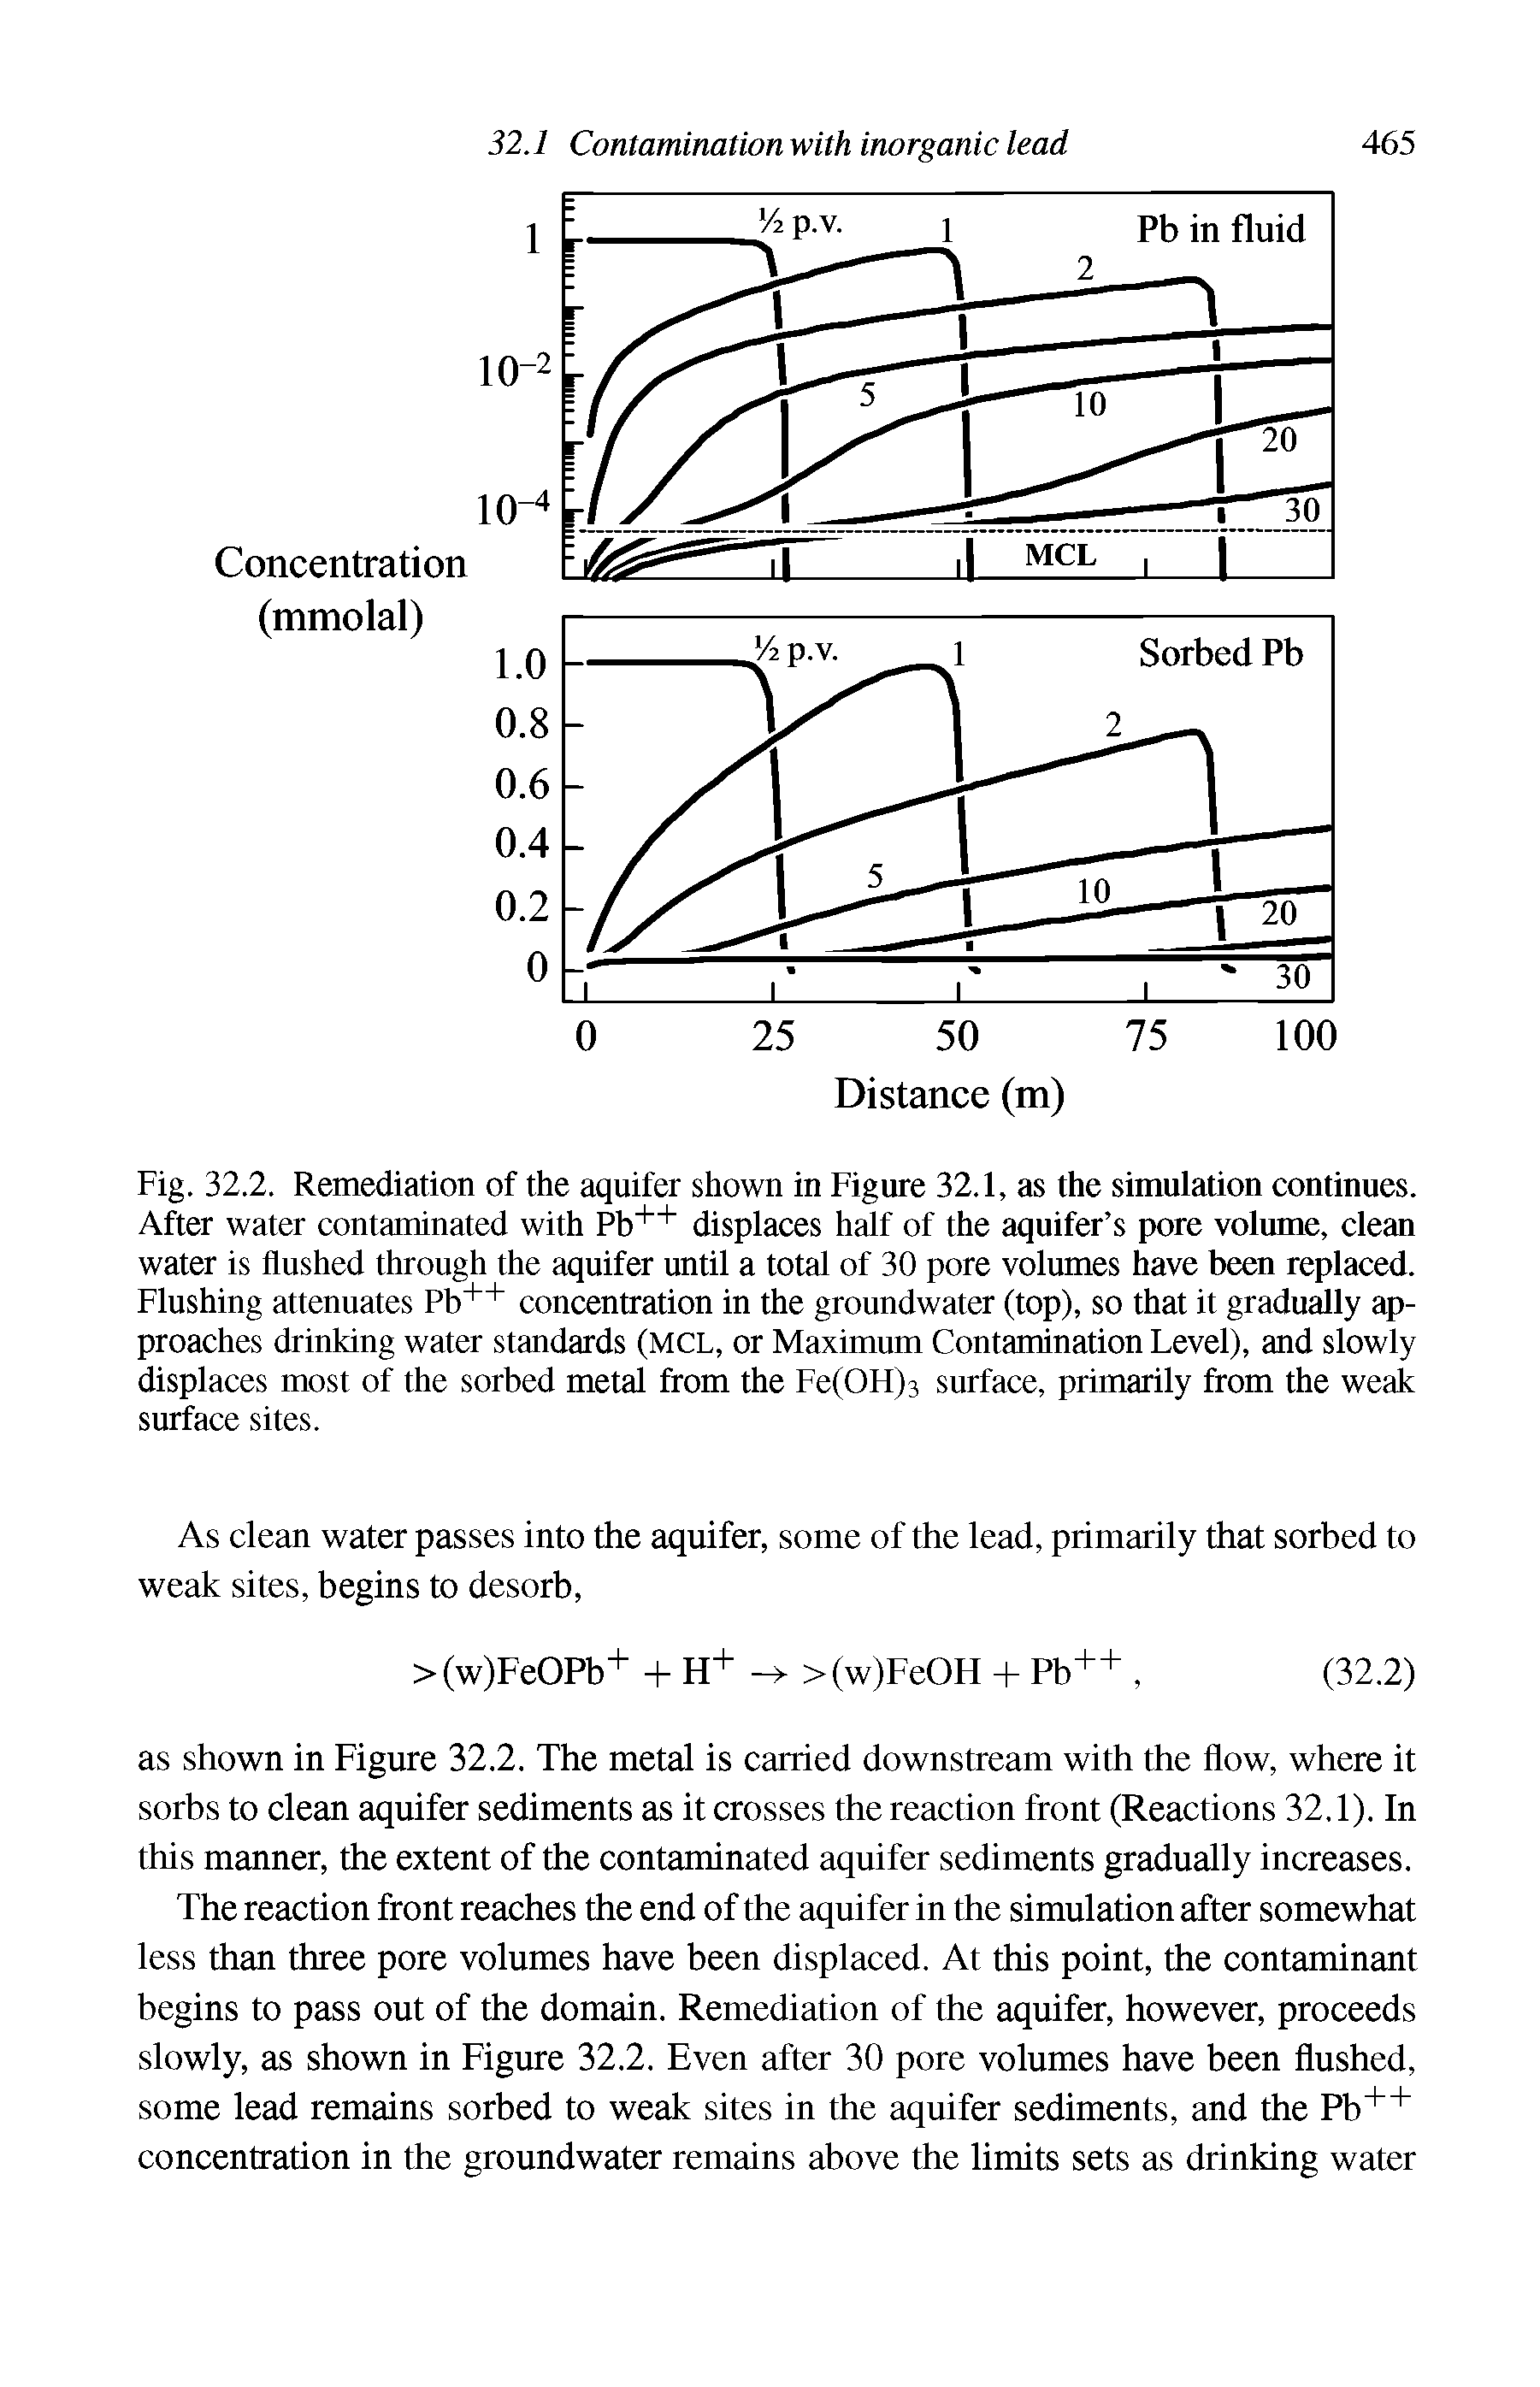 Fig. 32.2. Remediation of the aquifer shown in Figure 32.1, as the simulation continues. After water contaminated with Pb++ displaces half of the aquifer s pore volume, clean water is flushed through the aquifer until a total of 30 pore volumes have been replaced. Flushing attenuates Pb++ concentration in the groundwater (top), so that it gradually approaches drinking water standards (MCL, or Maximum Contamination Level), and slowly displaces most of the sorbed metal from the Fe(OH)3 surface, primarily from the weak surface sites.